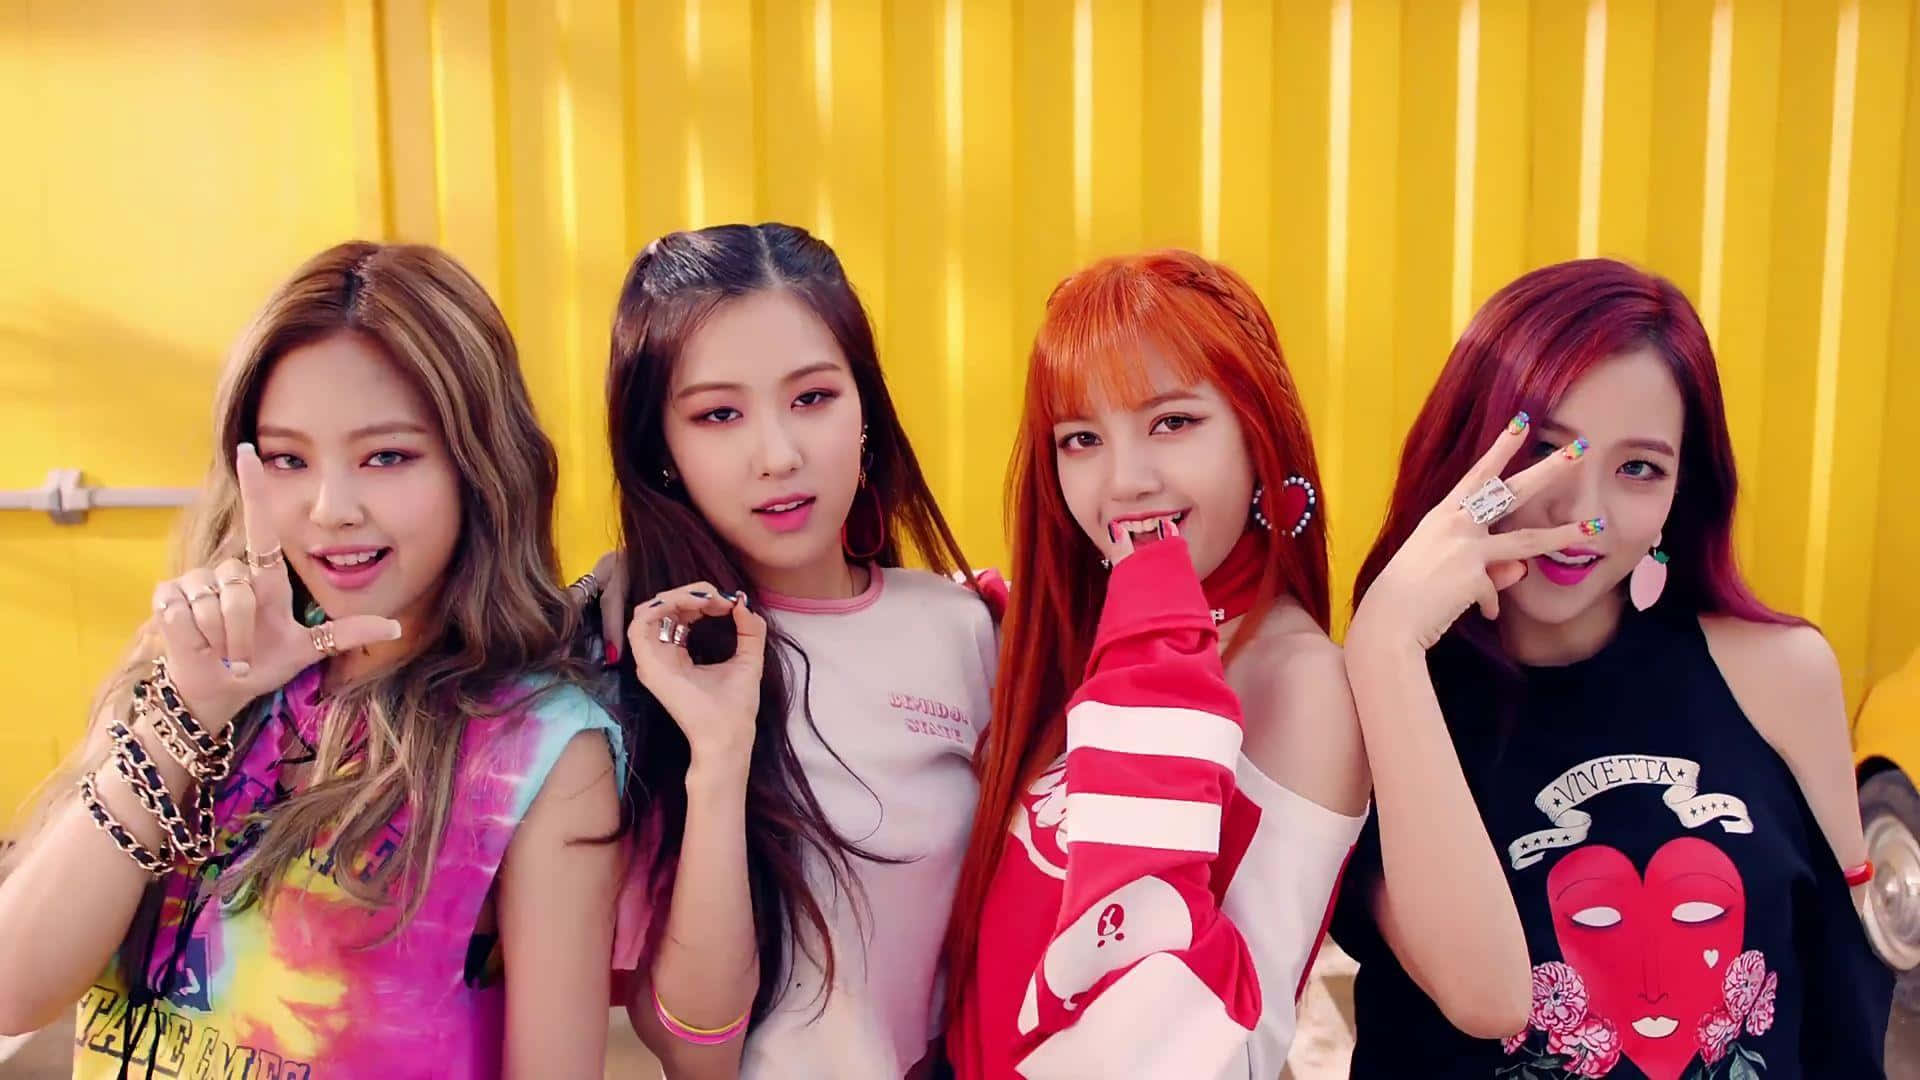 Blackpink – Bringing the heat to the party